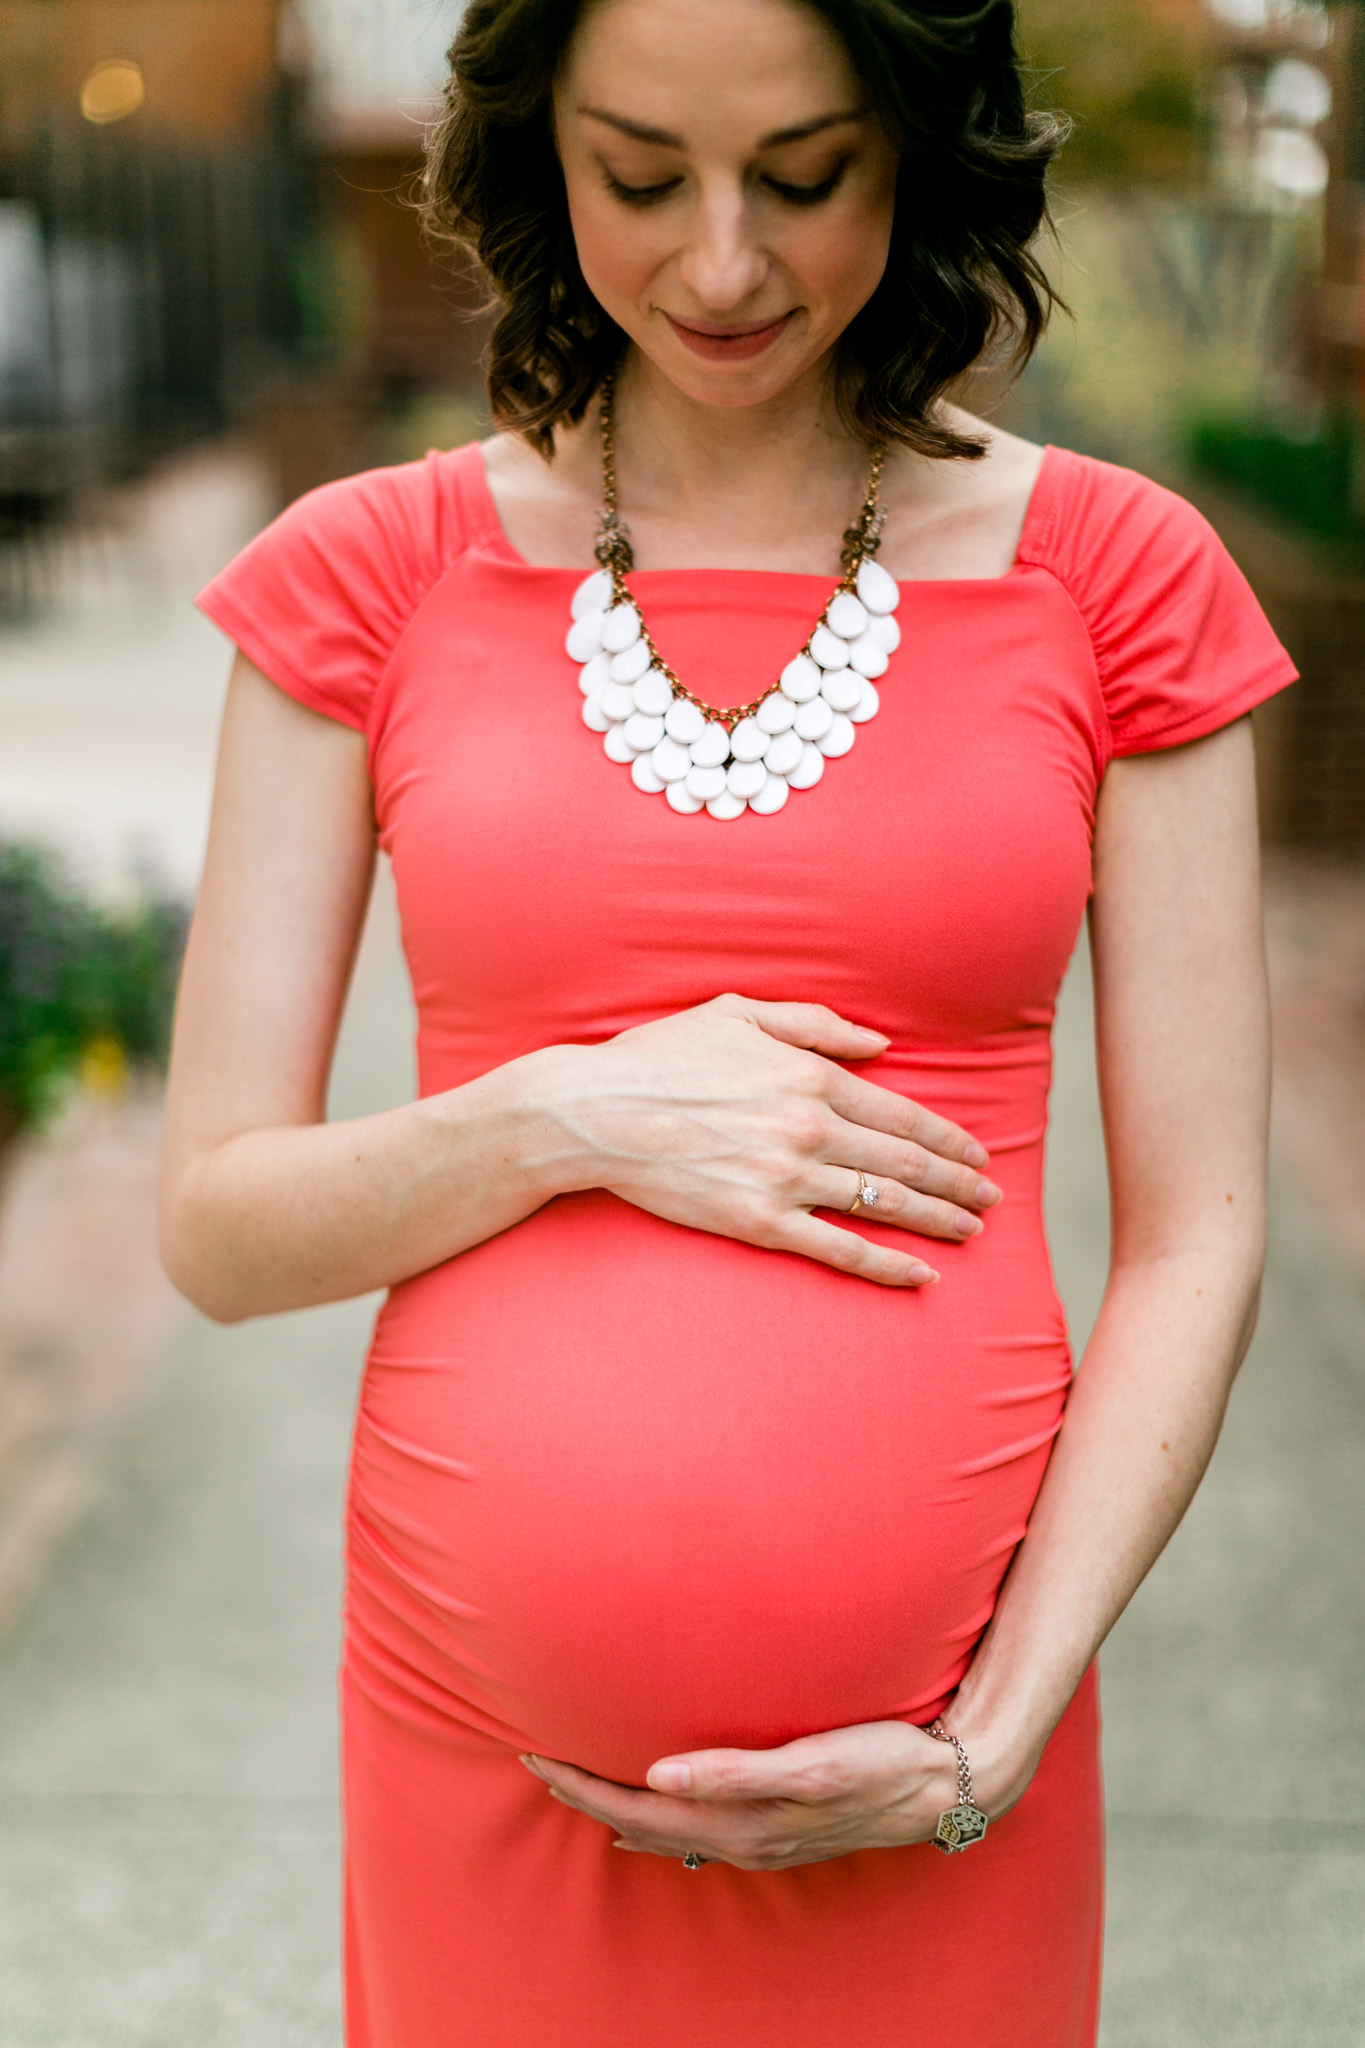 Woman wearing coral dress and holding baby bump | Durham Maternity Photographer | By G. Lin Photography